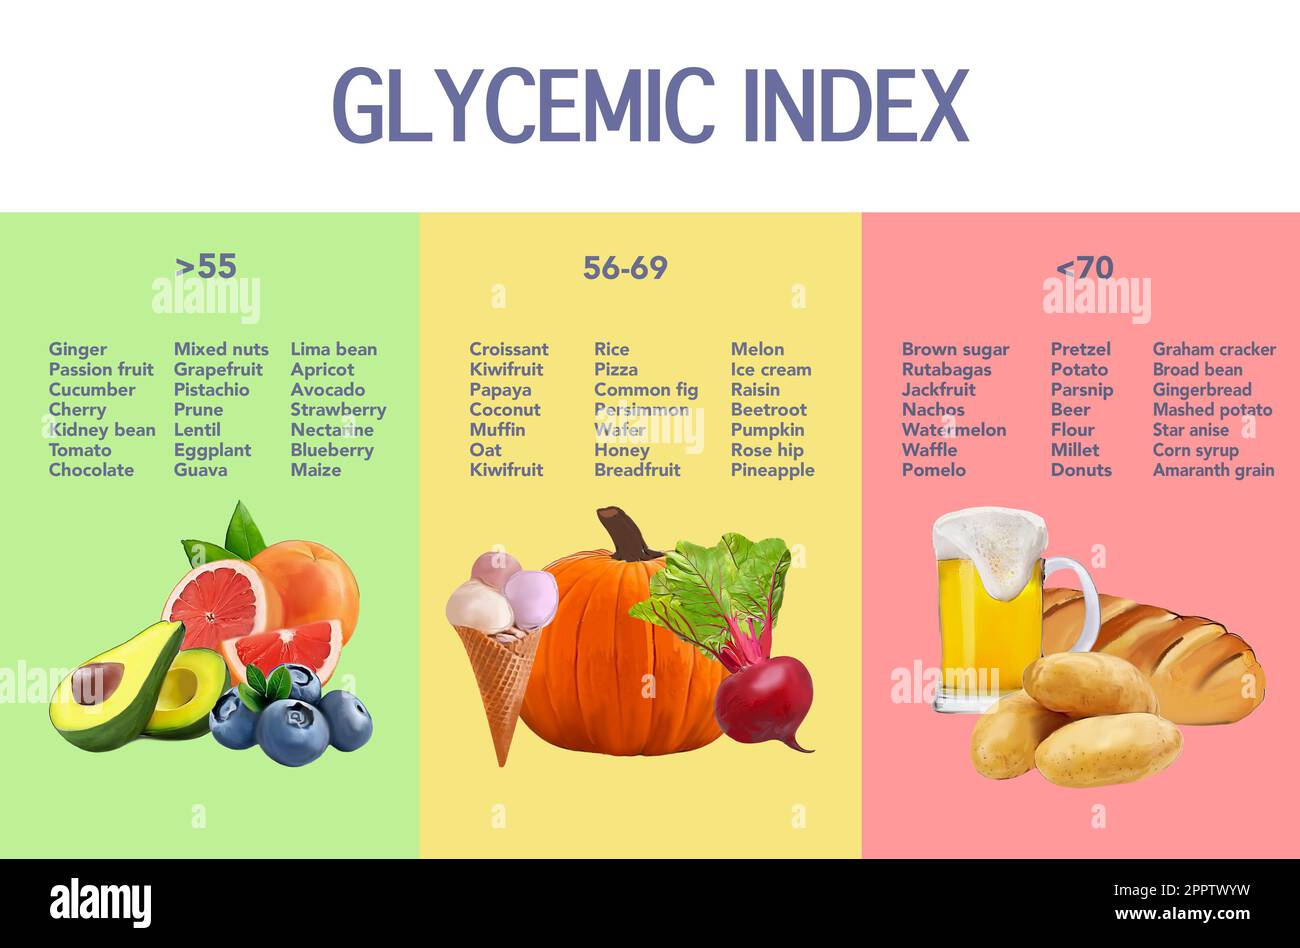 Glycemic index chart for common foods. Illustration Stock Photo - Alamy